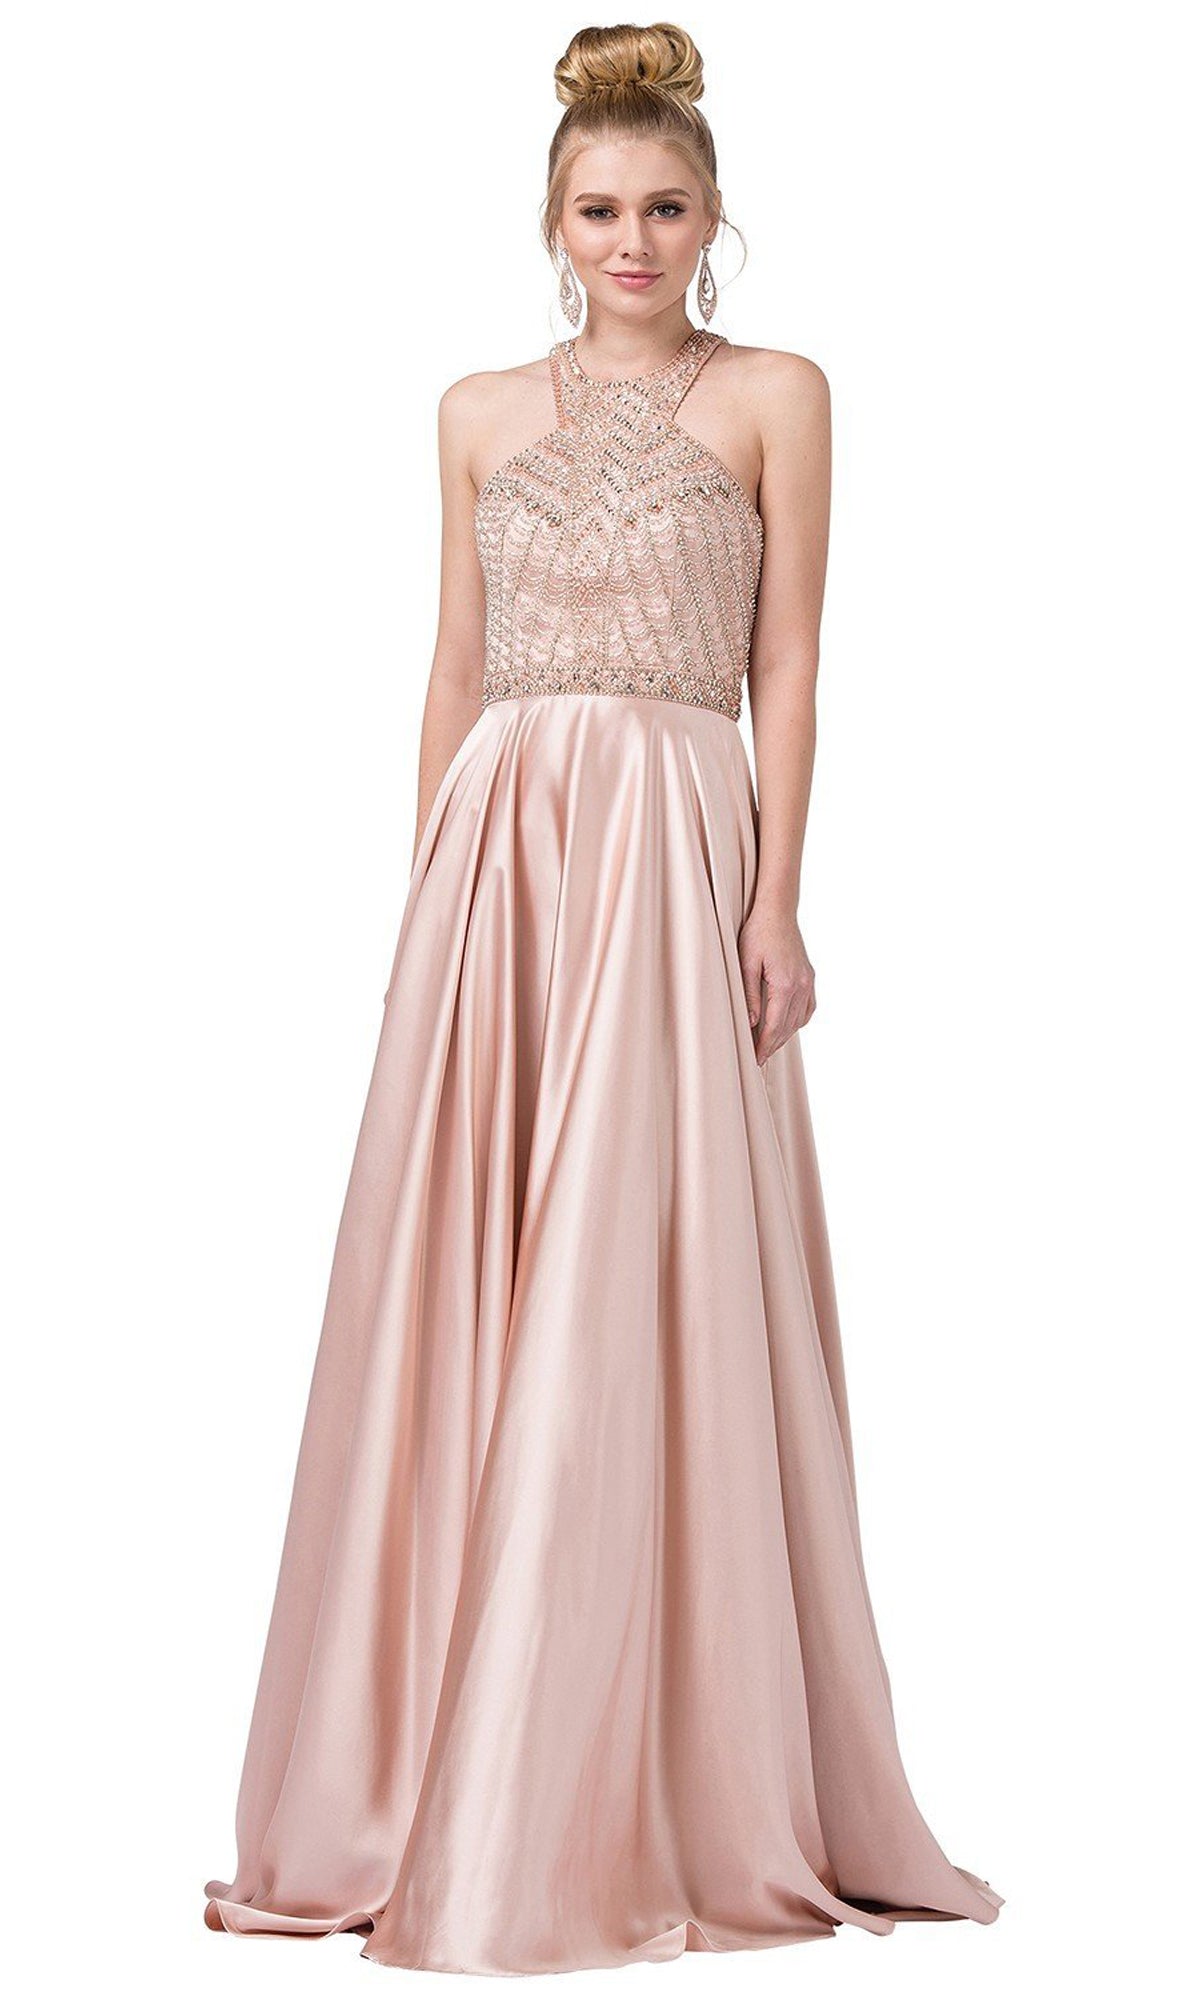 Rose Gold A-Line High-Neck Formal Dress with Beaded Bodice